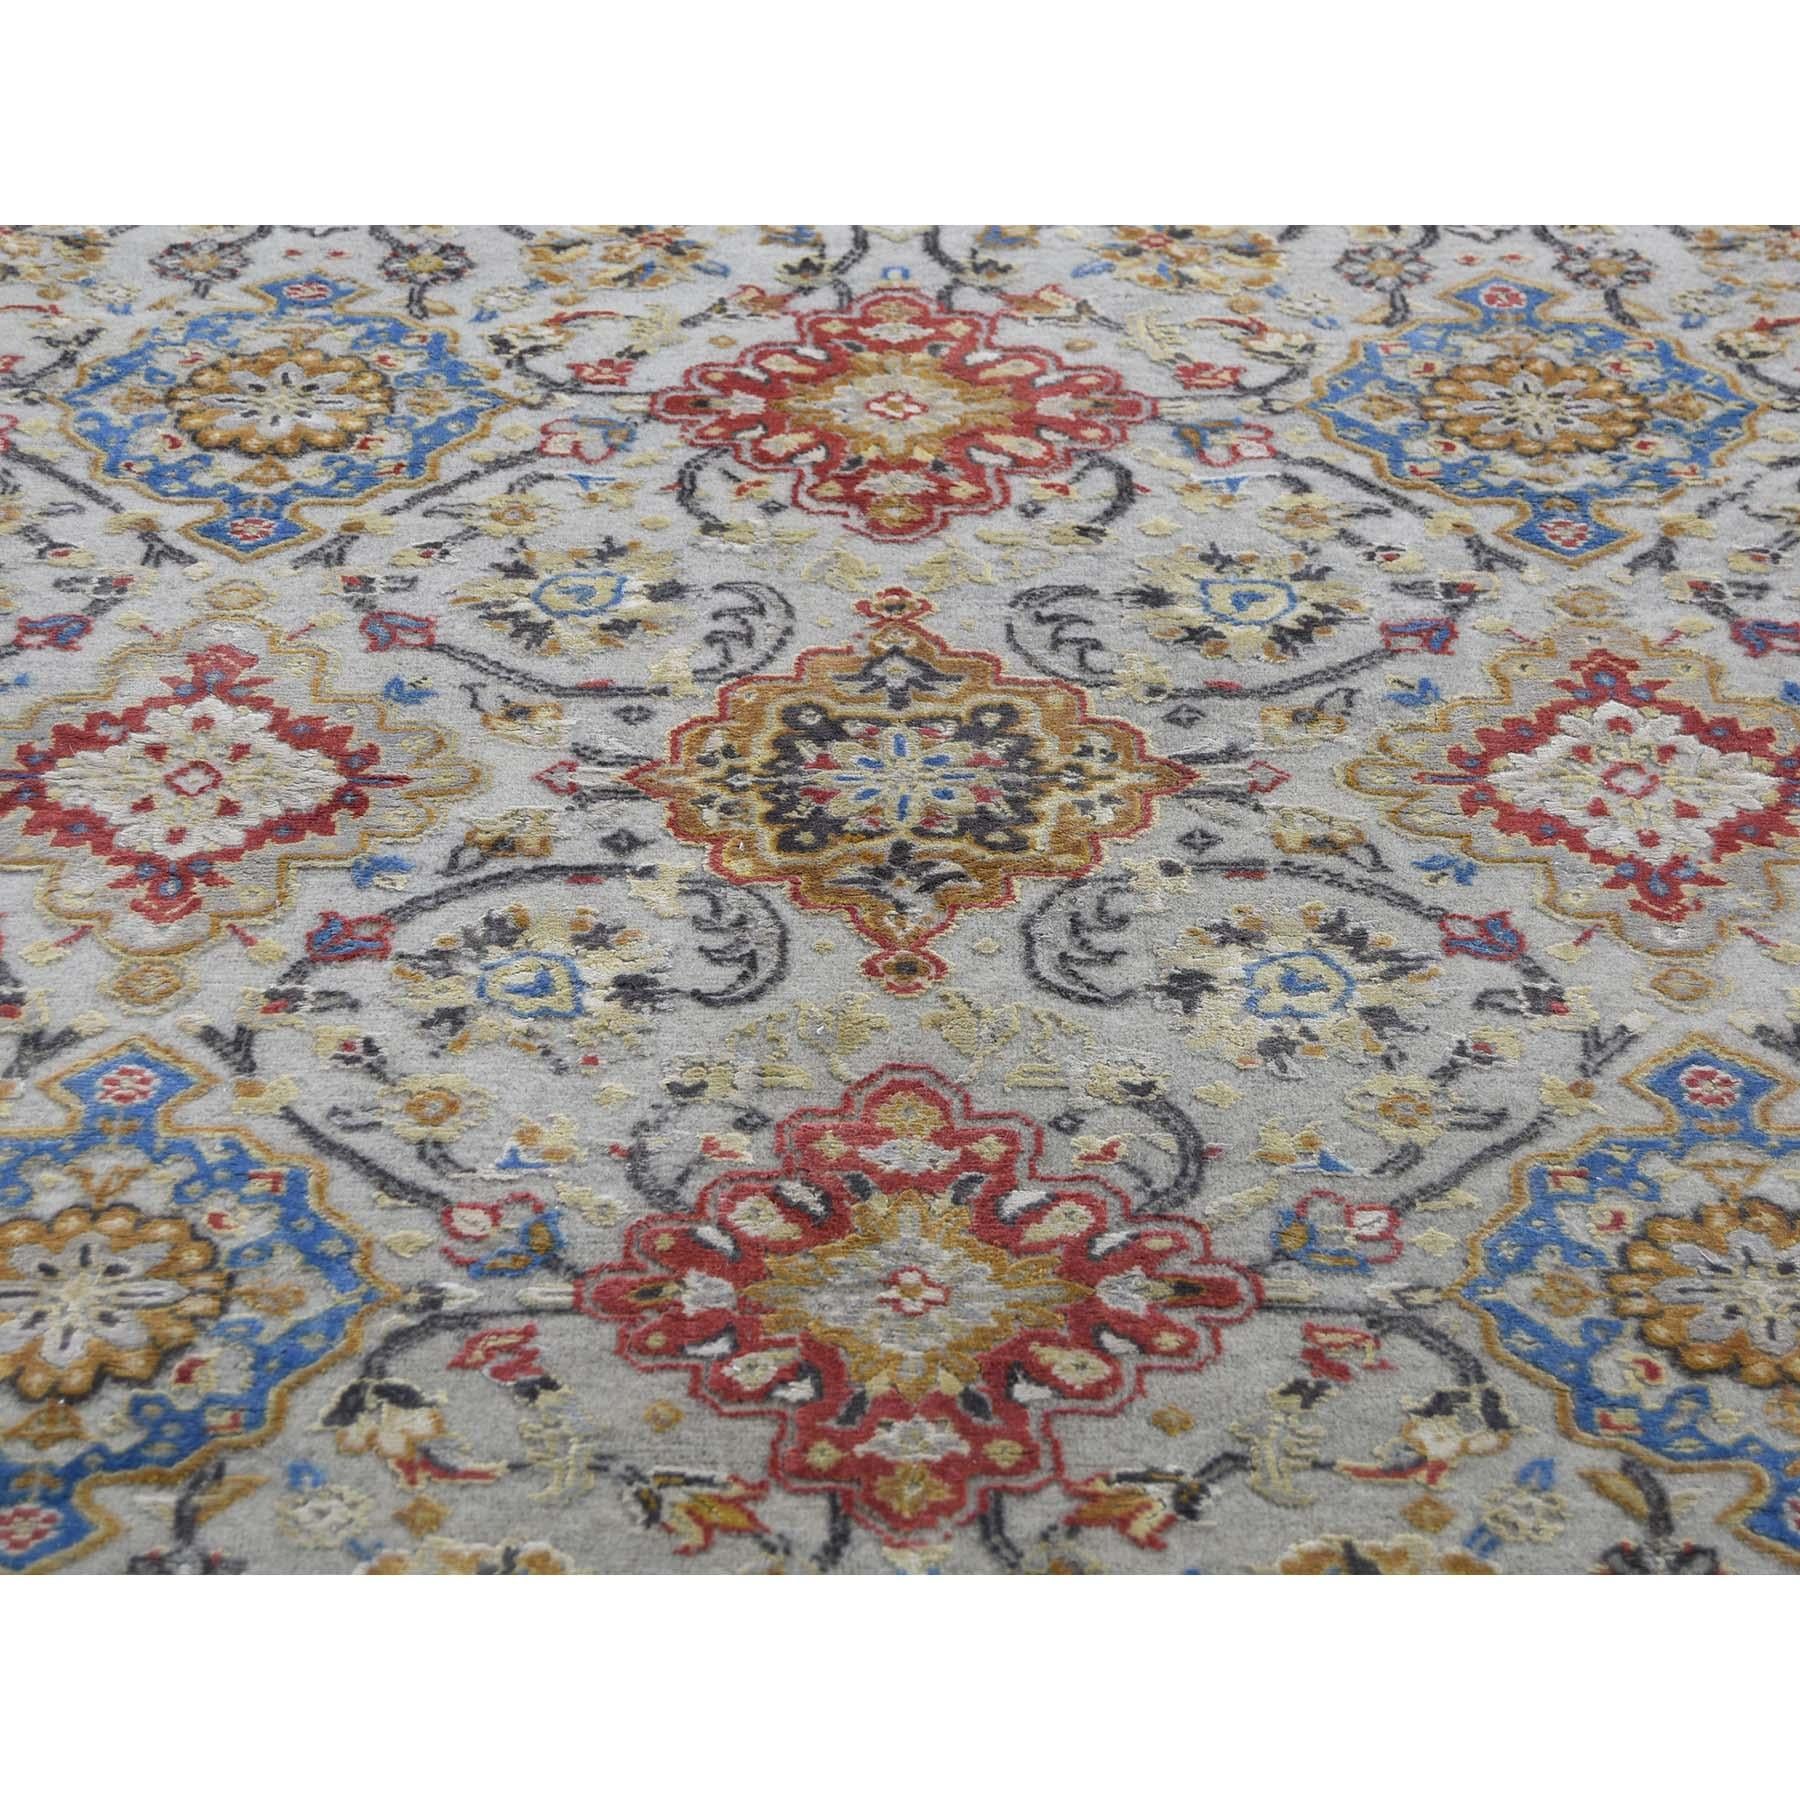 The Sunset Rosettes Pure Silk and Wool Hand-Knotted Oriental Rug 3